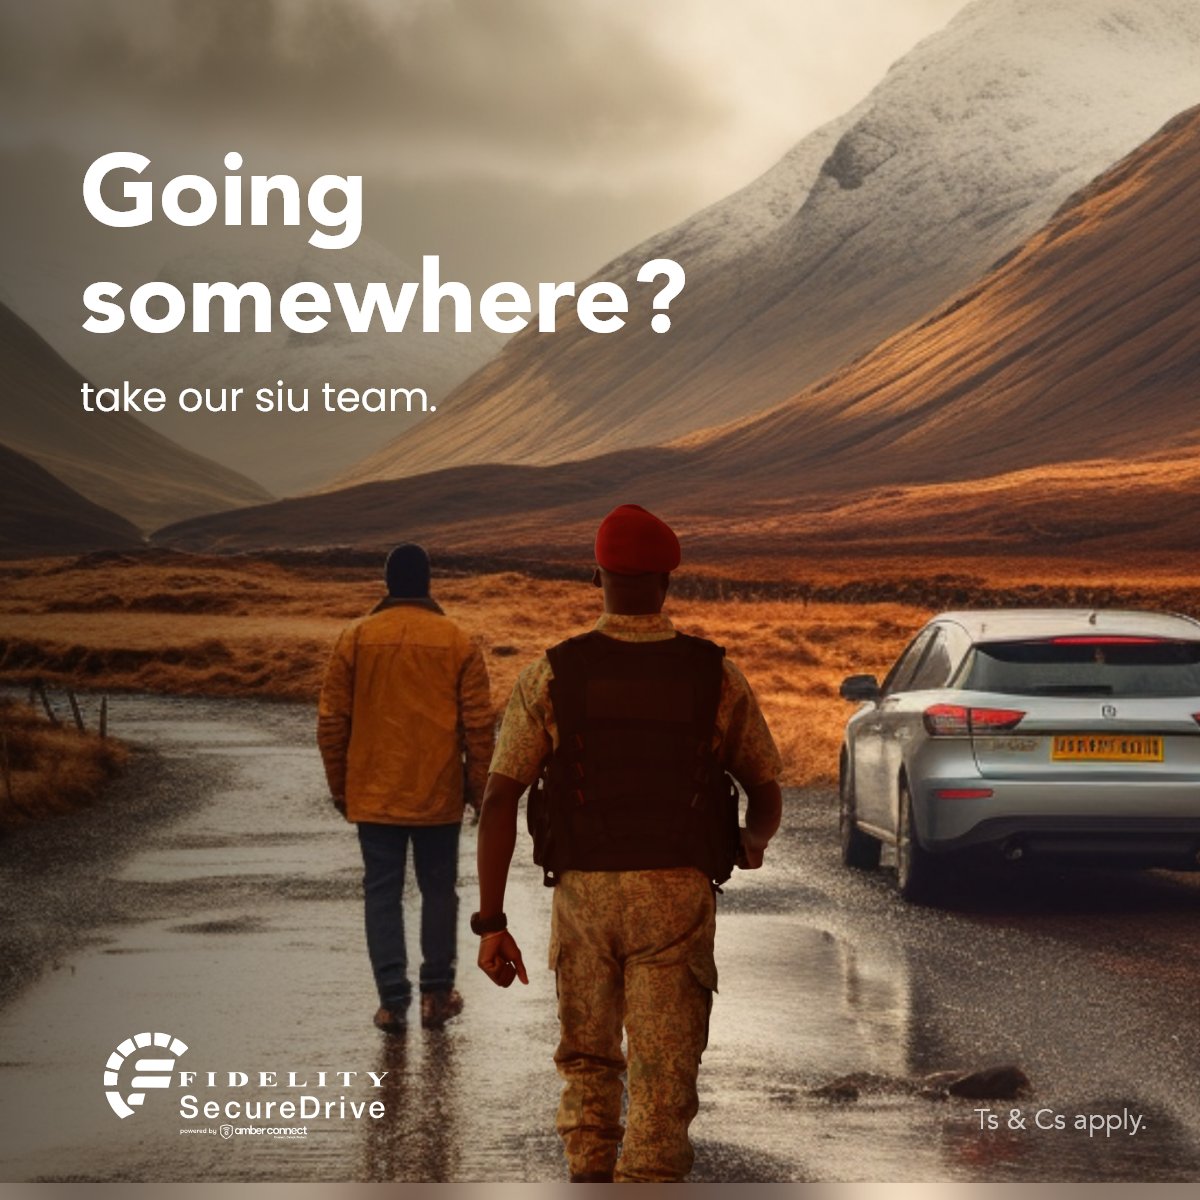 Our team never misses a beat, even when you’re off the beaten track.

#FidelitySecureDrive #VehicleTracking #YourDrivingCompanion